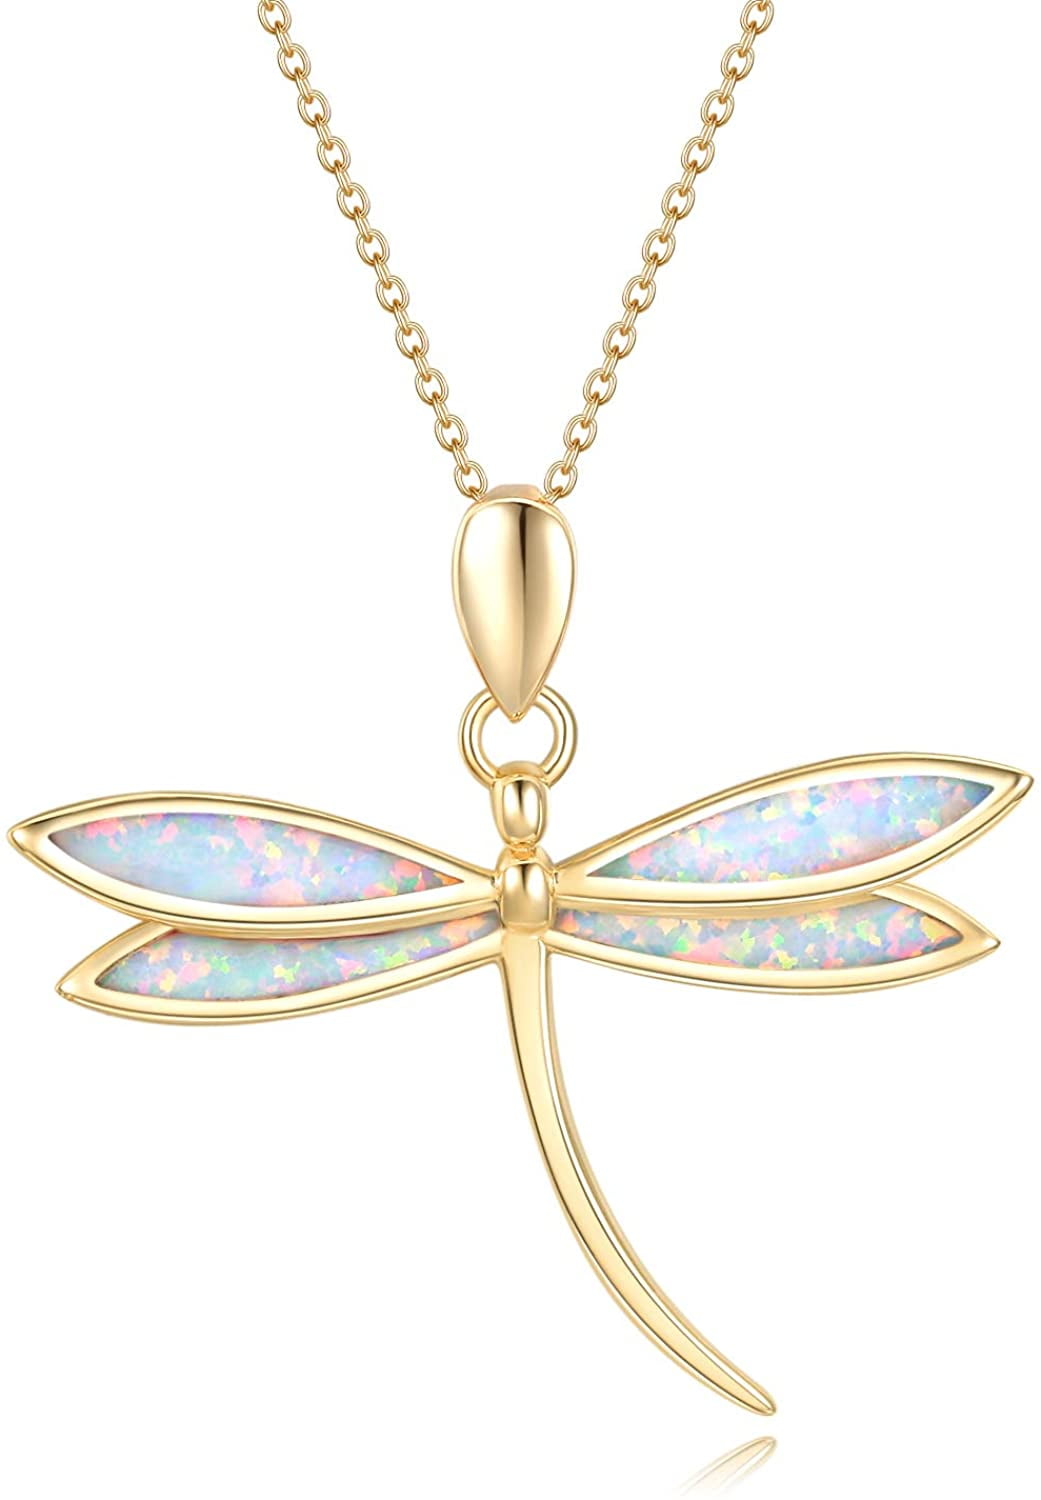 Fashion 18K Gold Dragonfly Rose Red Fire Opal Charm Pendant Necklace Chain NEW ！